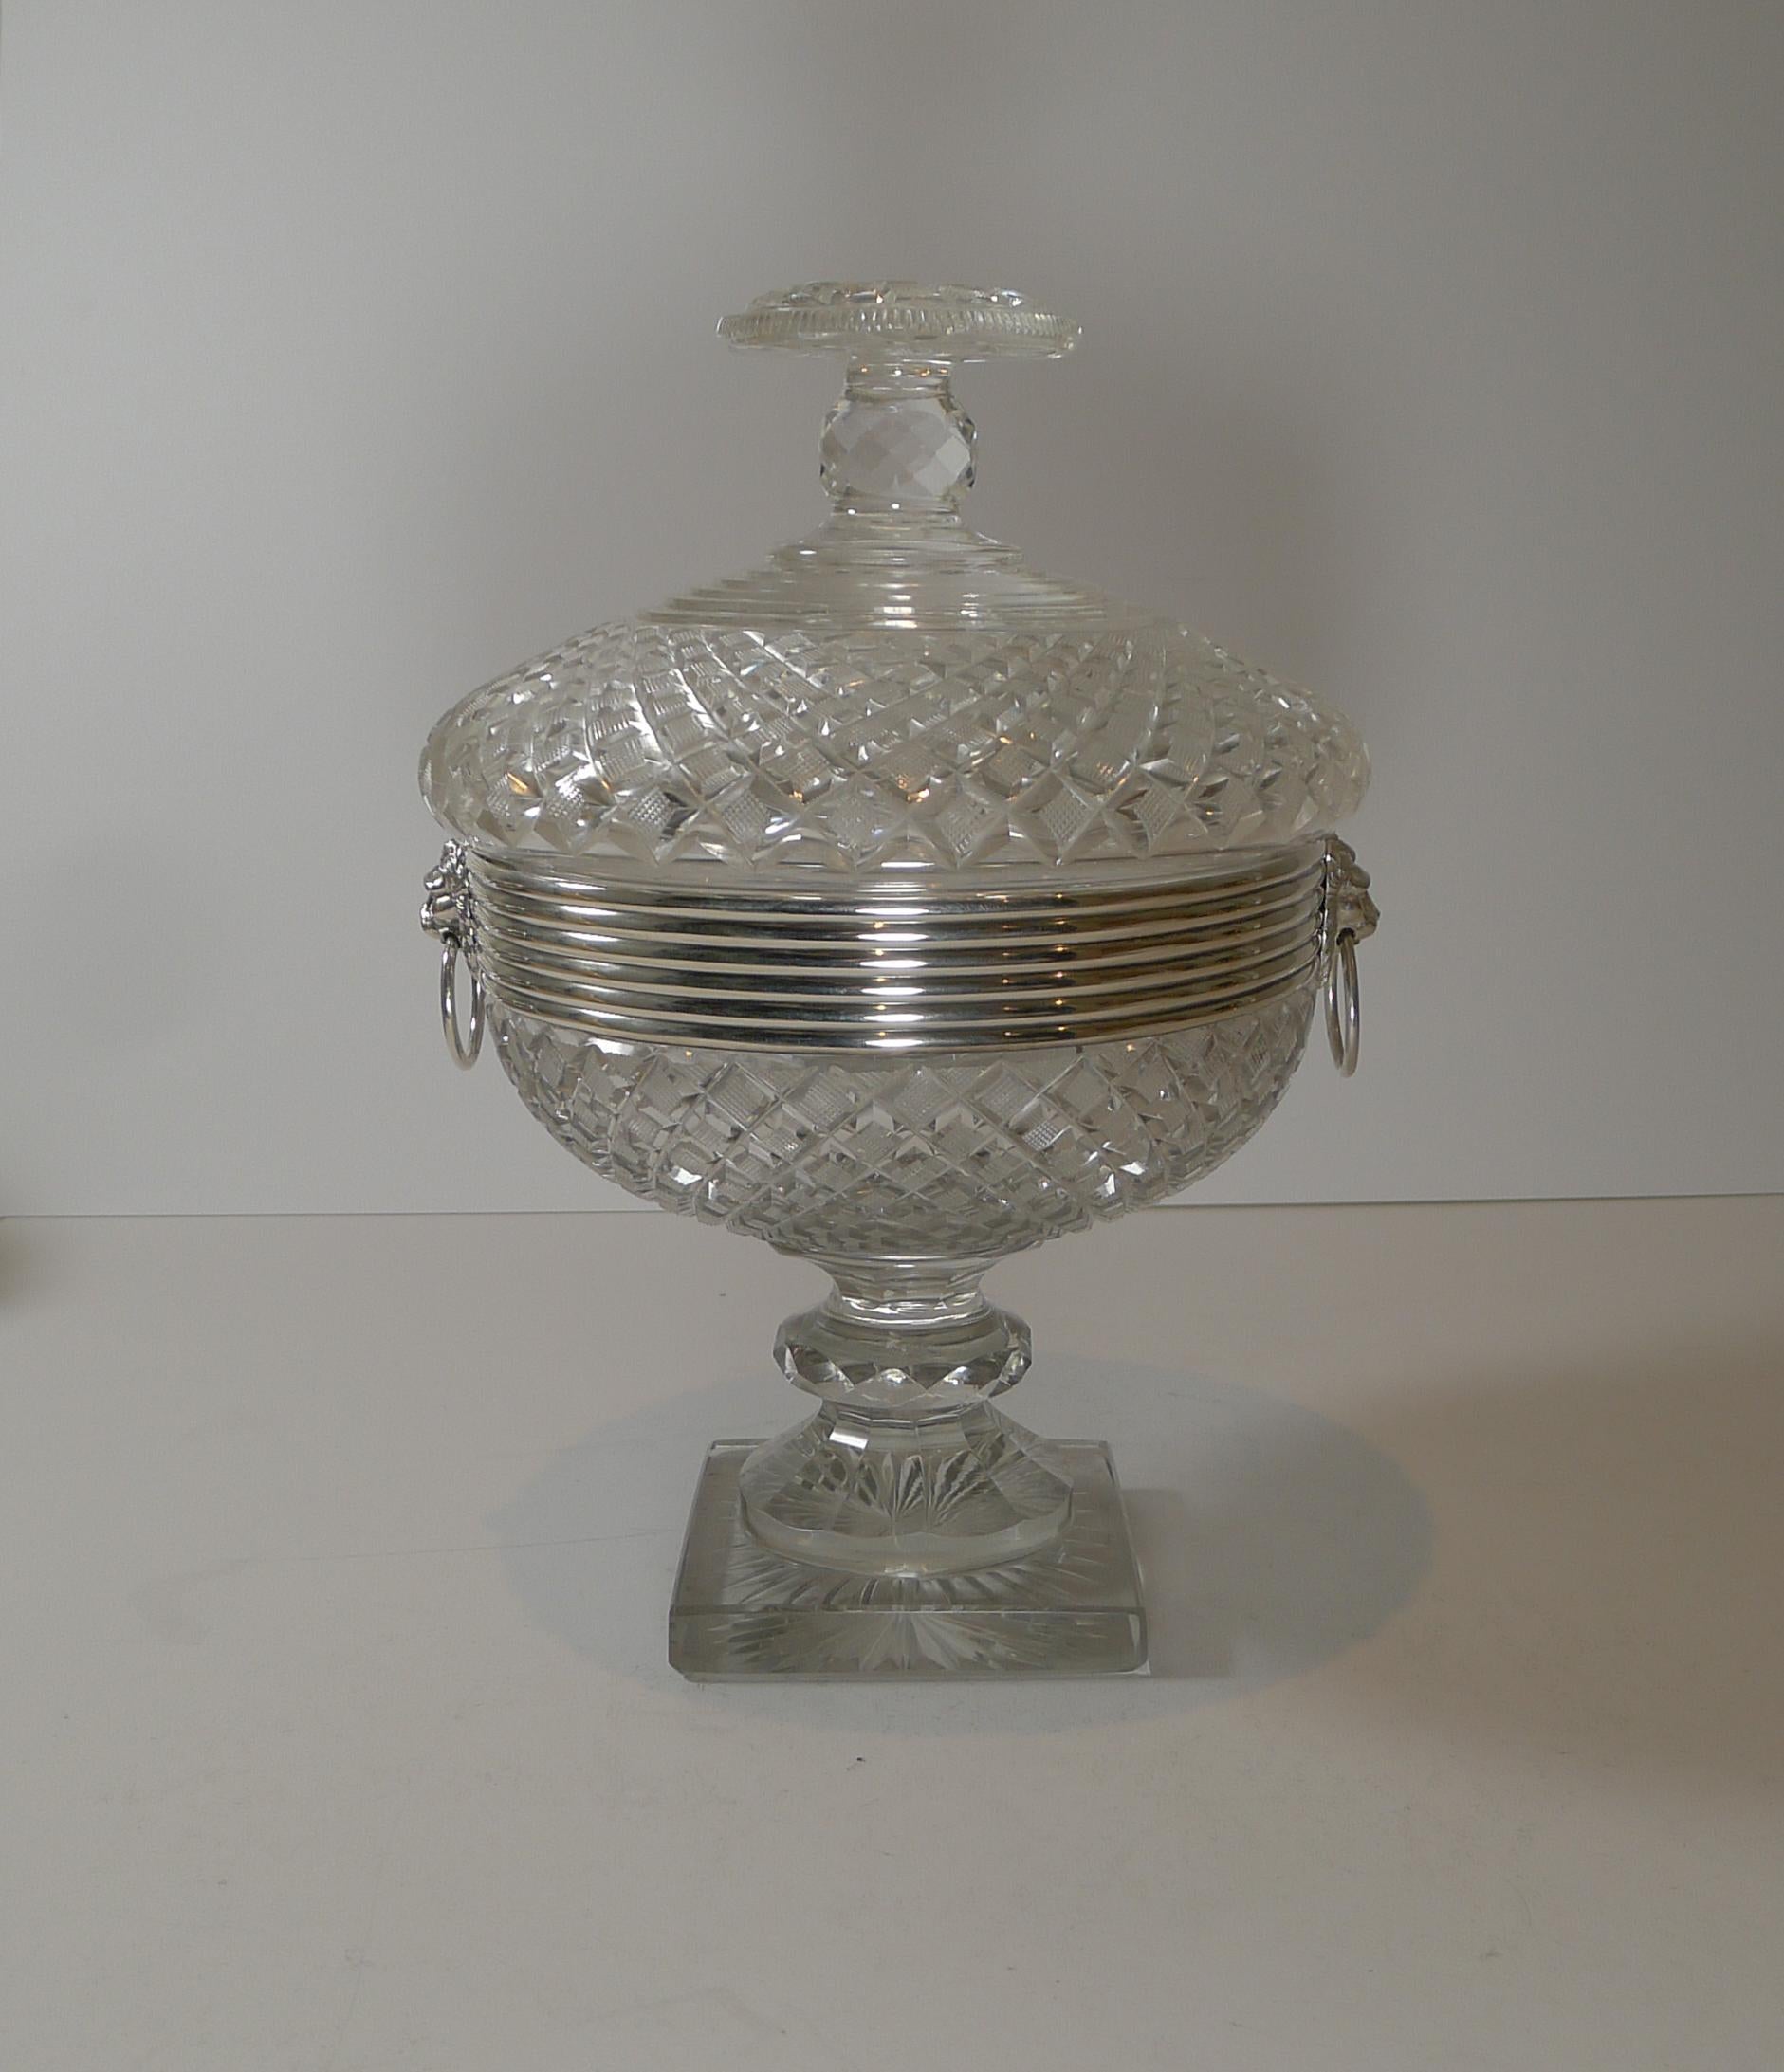 Grand Cut Crystal & Dutch Silver Covered Sweet / Candy Bowl c.1880 For Sale 9